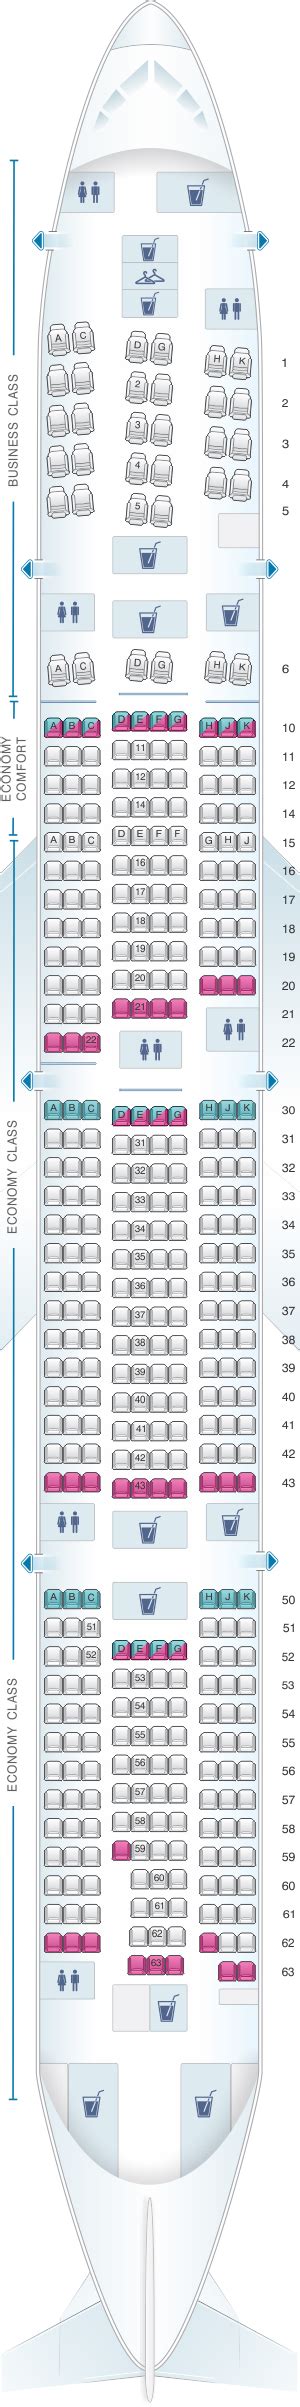 Seat Map Klm Boeing B777 300er New World Business Class Seatmaestro